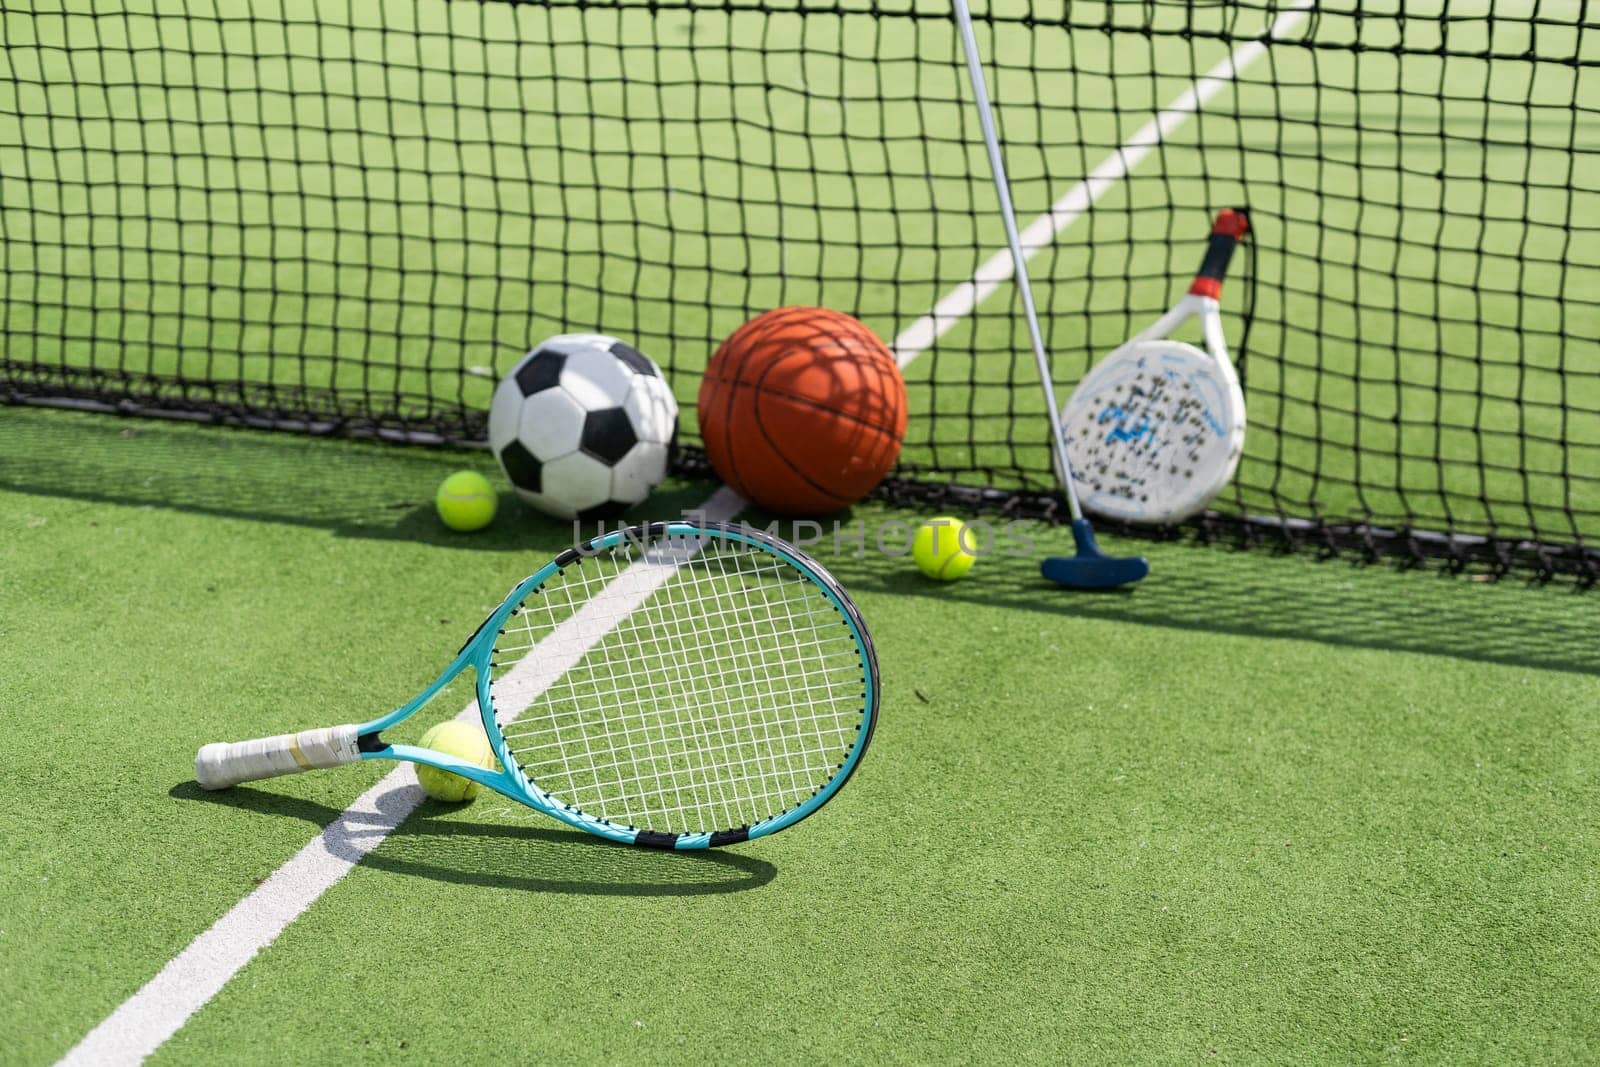 A variety of sports equipment including an american football, a soccer ball, a tennis racket, a tennis ball, and a basketball. High quality photo